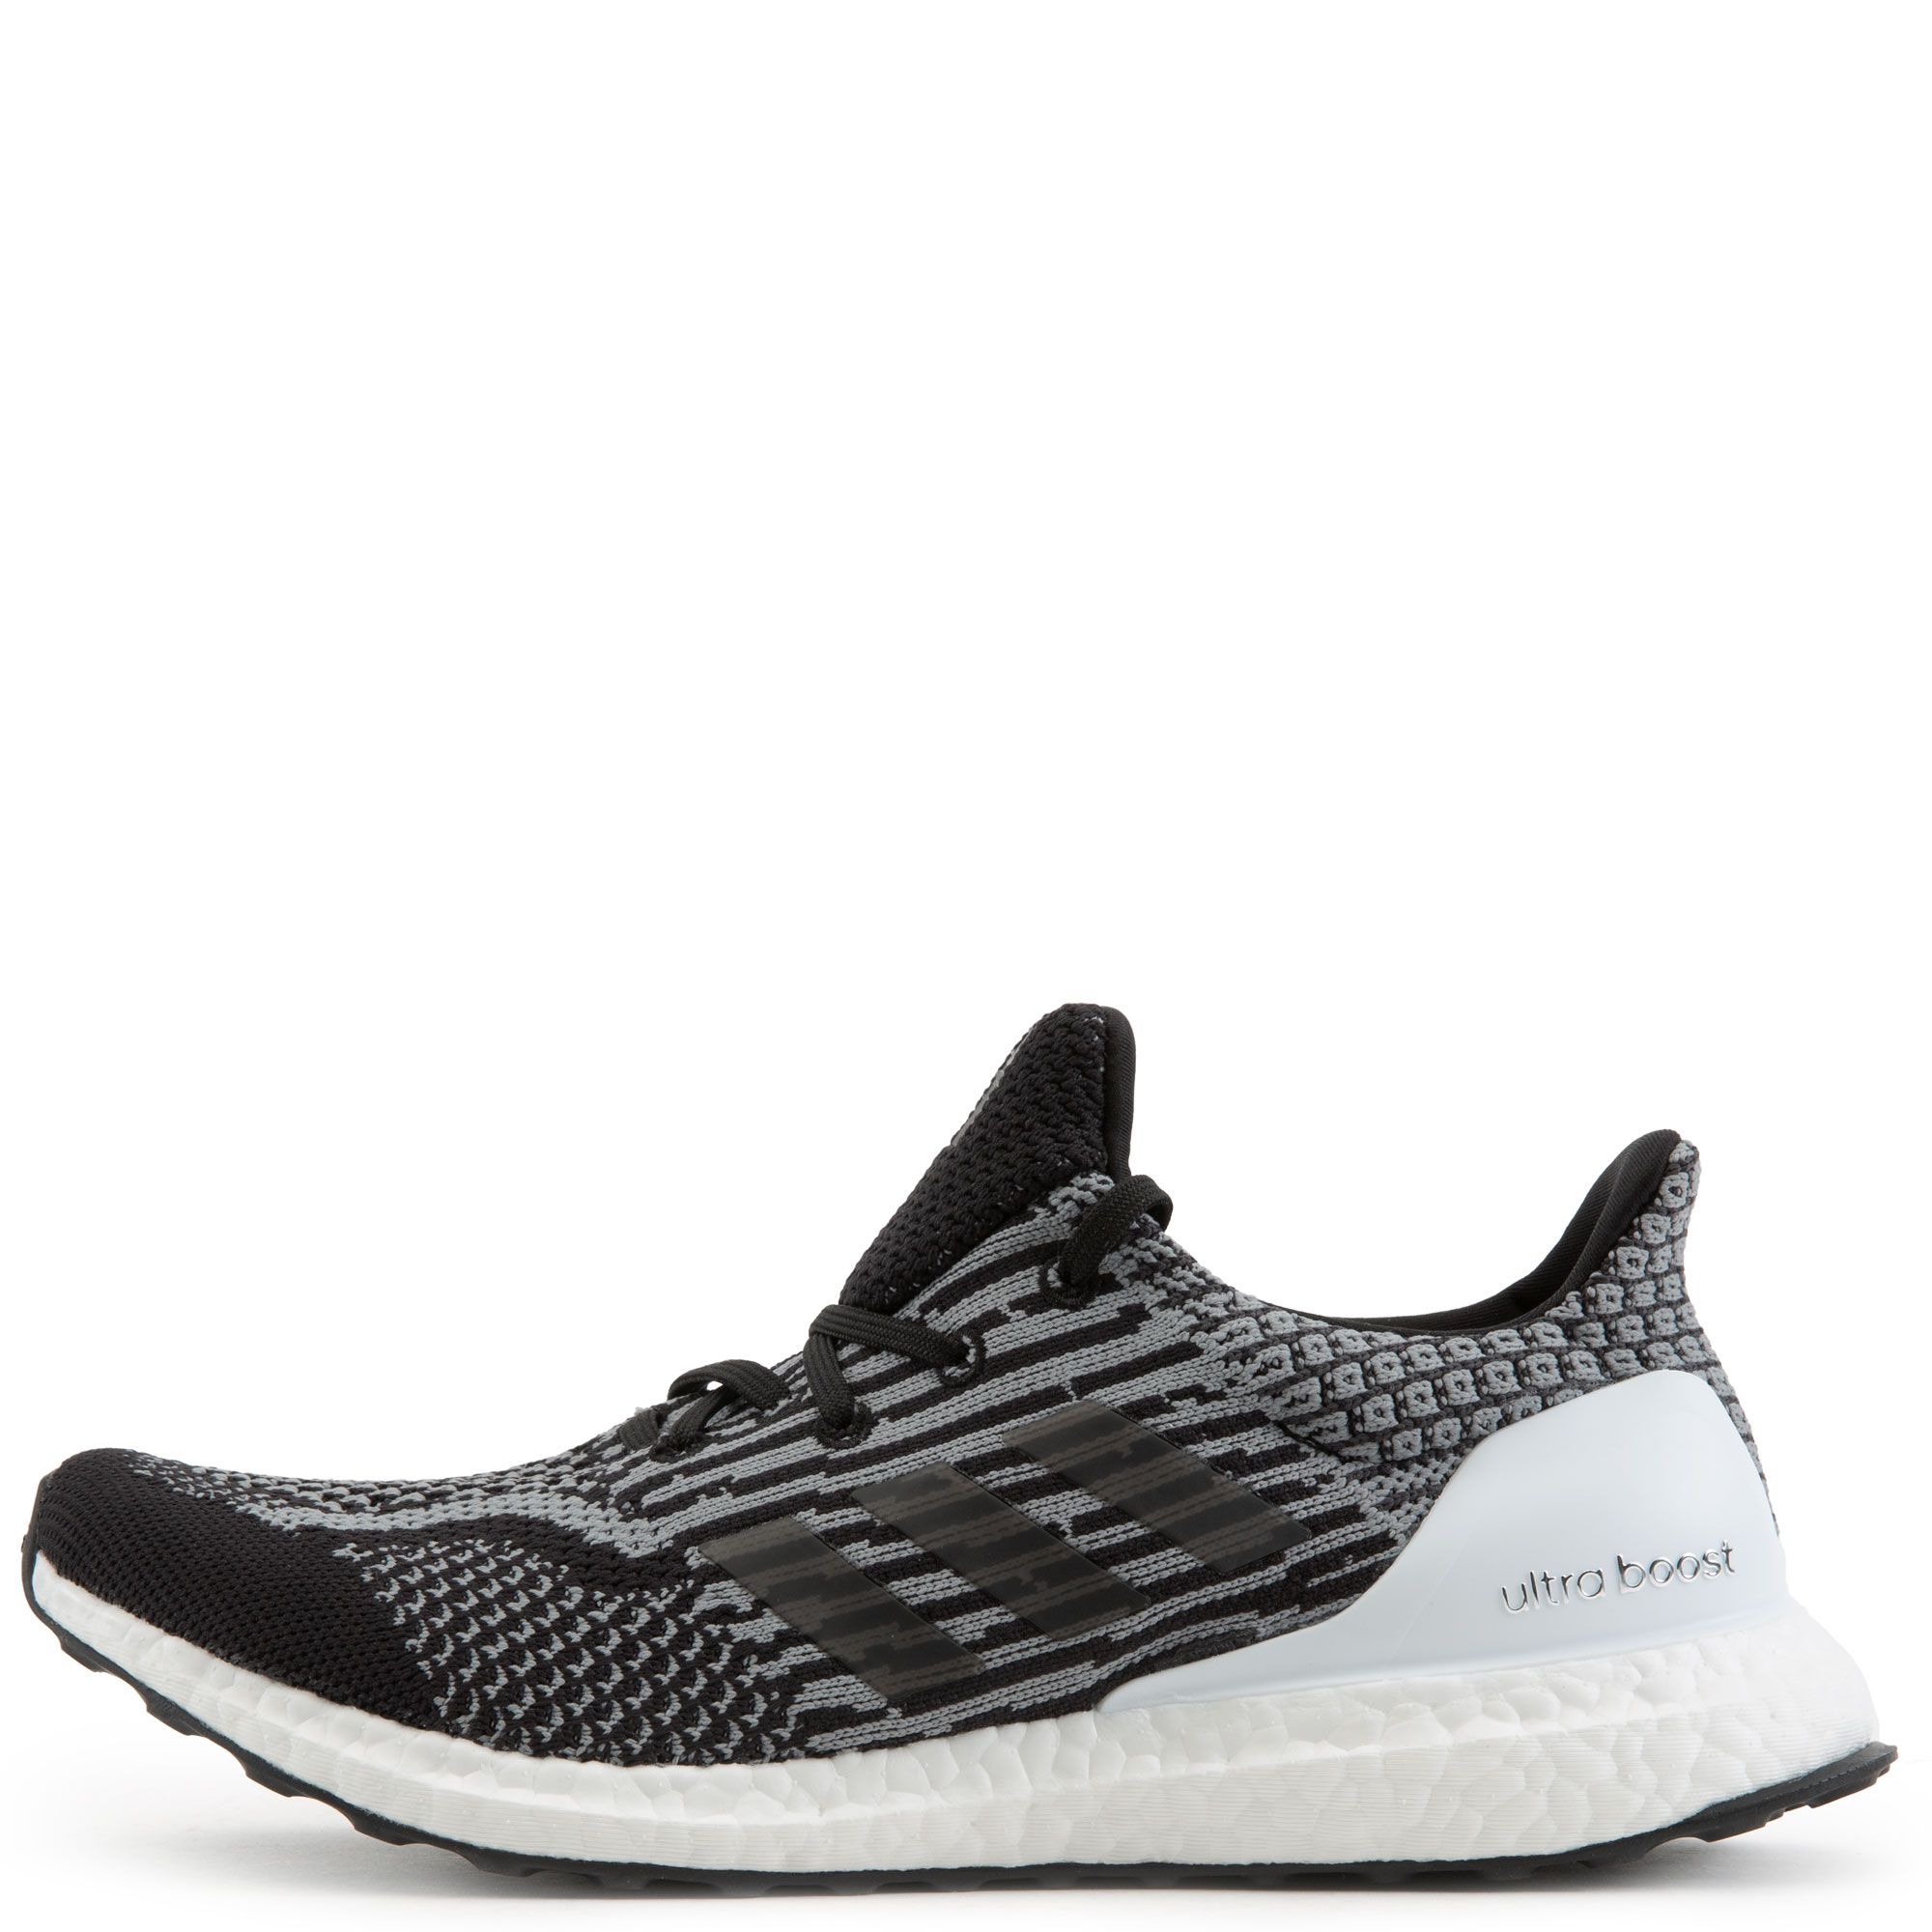 ultraboost 5.0 uncaged dna